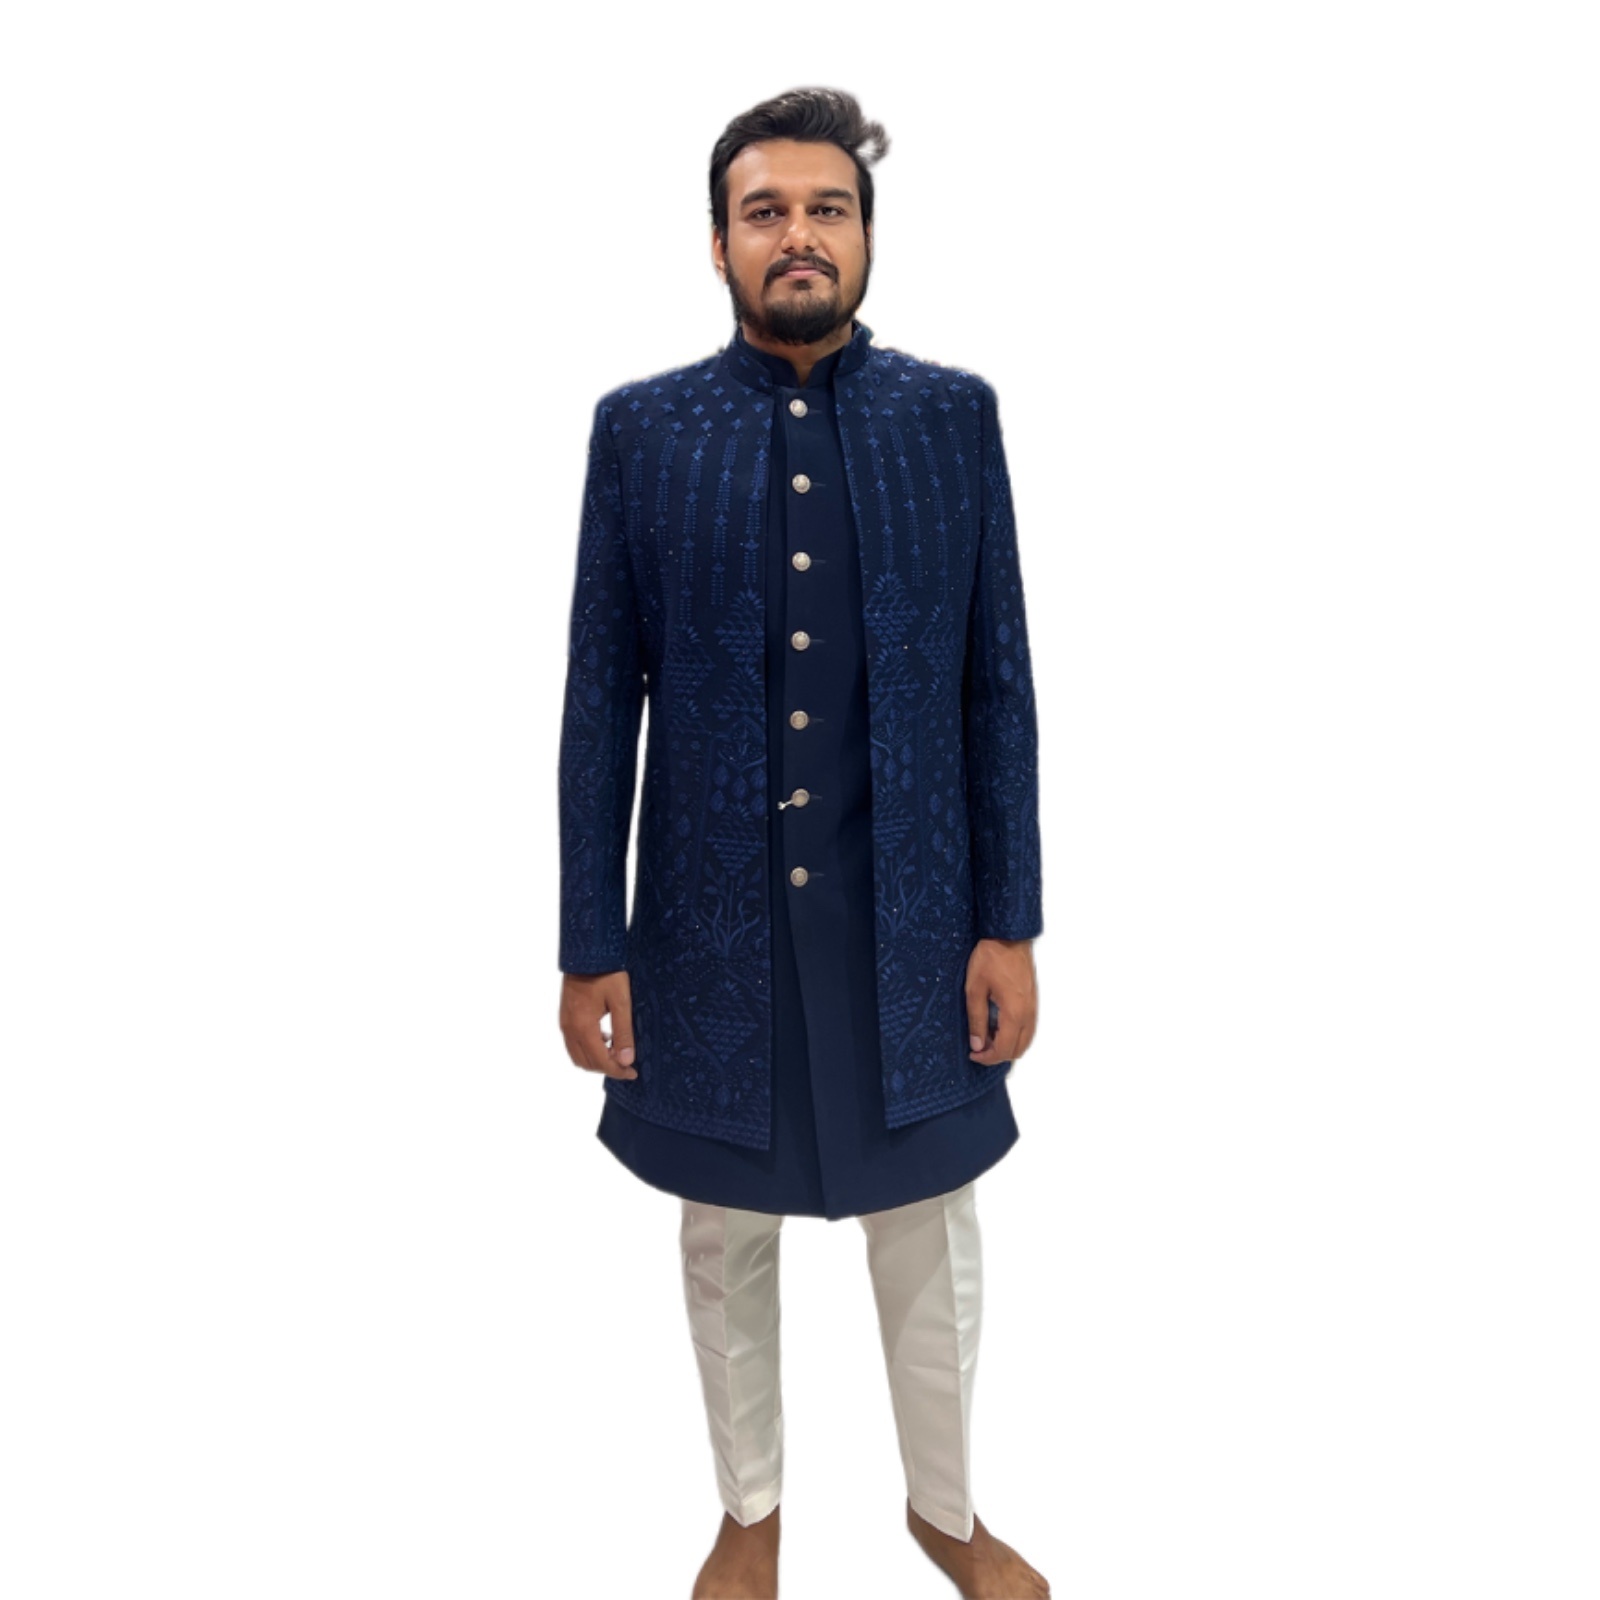 "Blue Indo Western Suit for Men showcased at Fancyano Wedding Dress Rental Store, Udaipur. Explore timeless elegance and style."